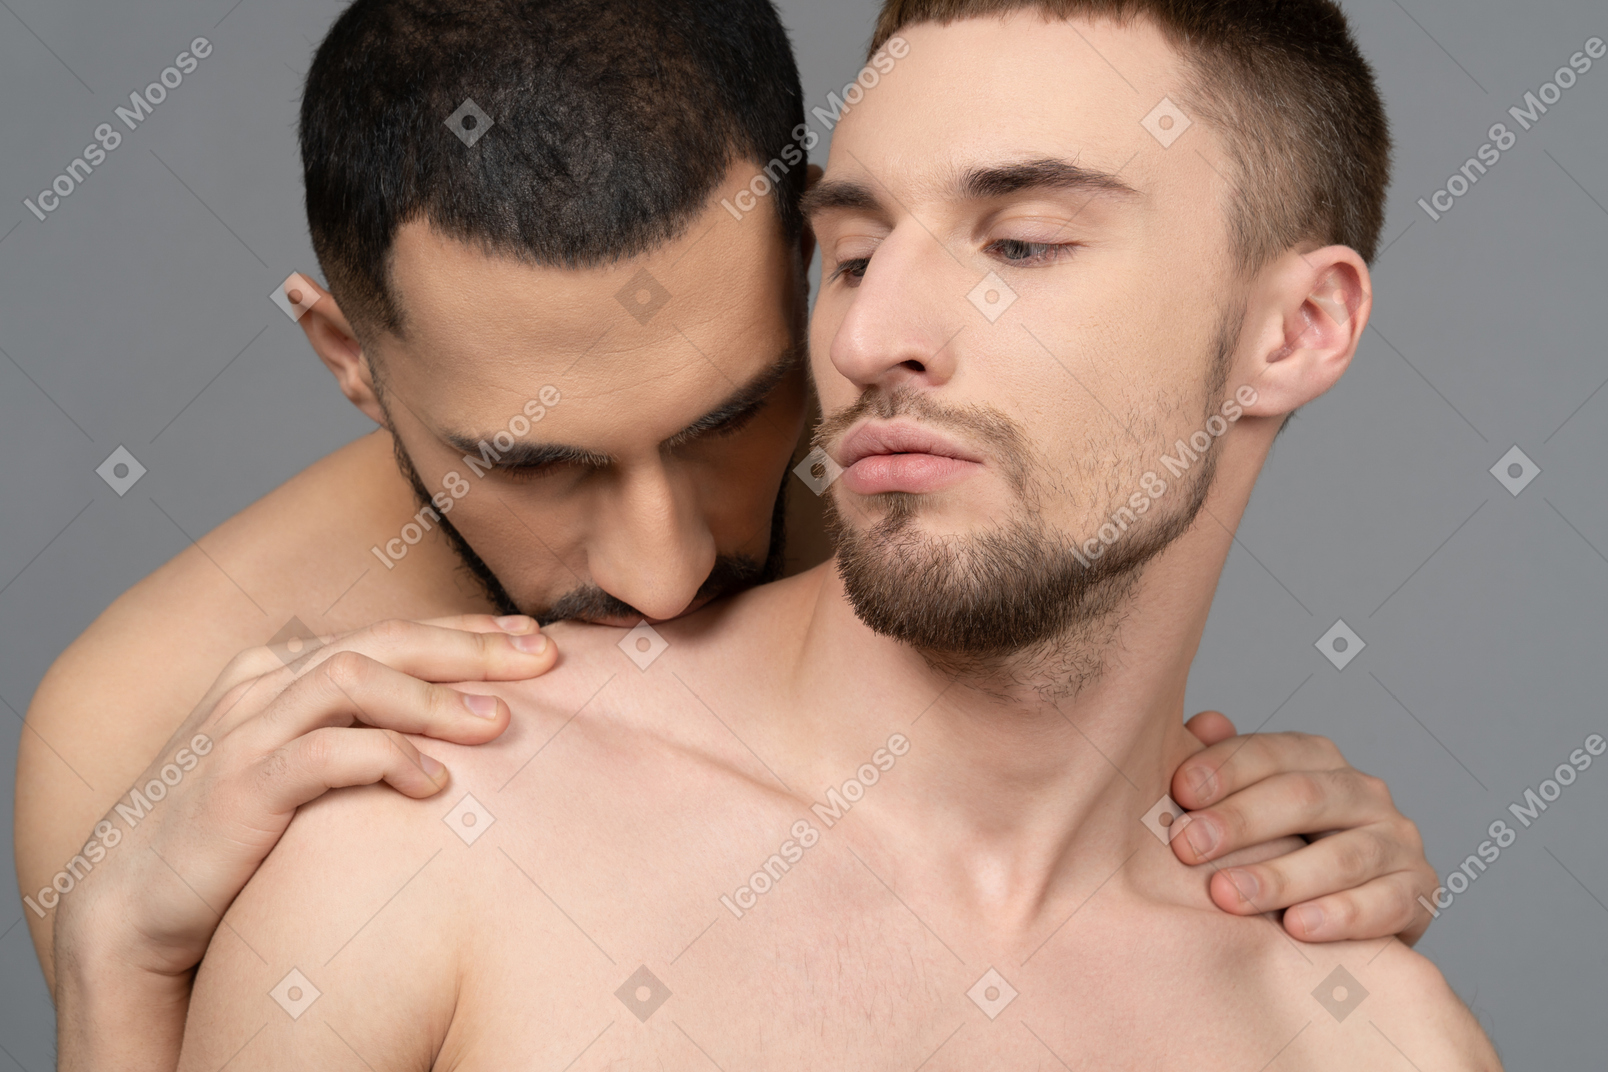 Close-up of a young man kissing boyfriend's shoulder